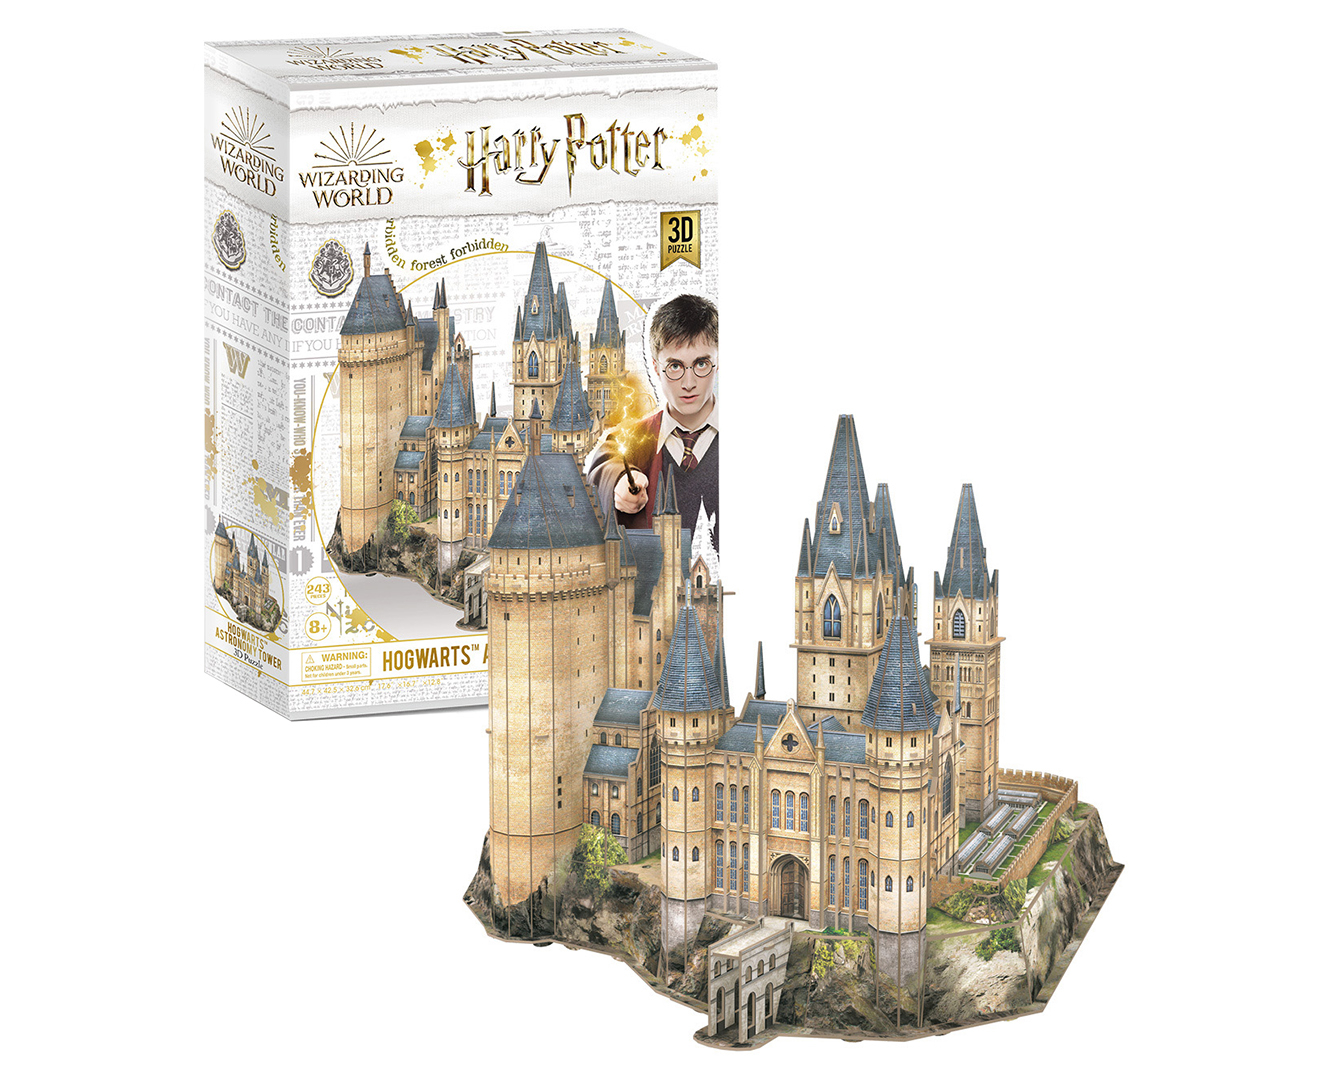 Target Is Selling a 3D Puzzle of the Great Hall From Harry Potter